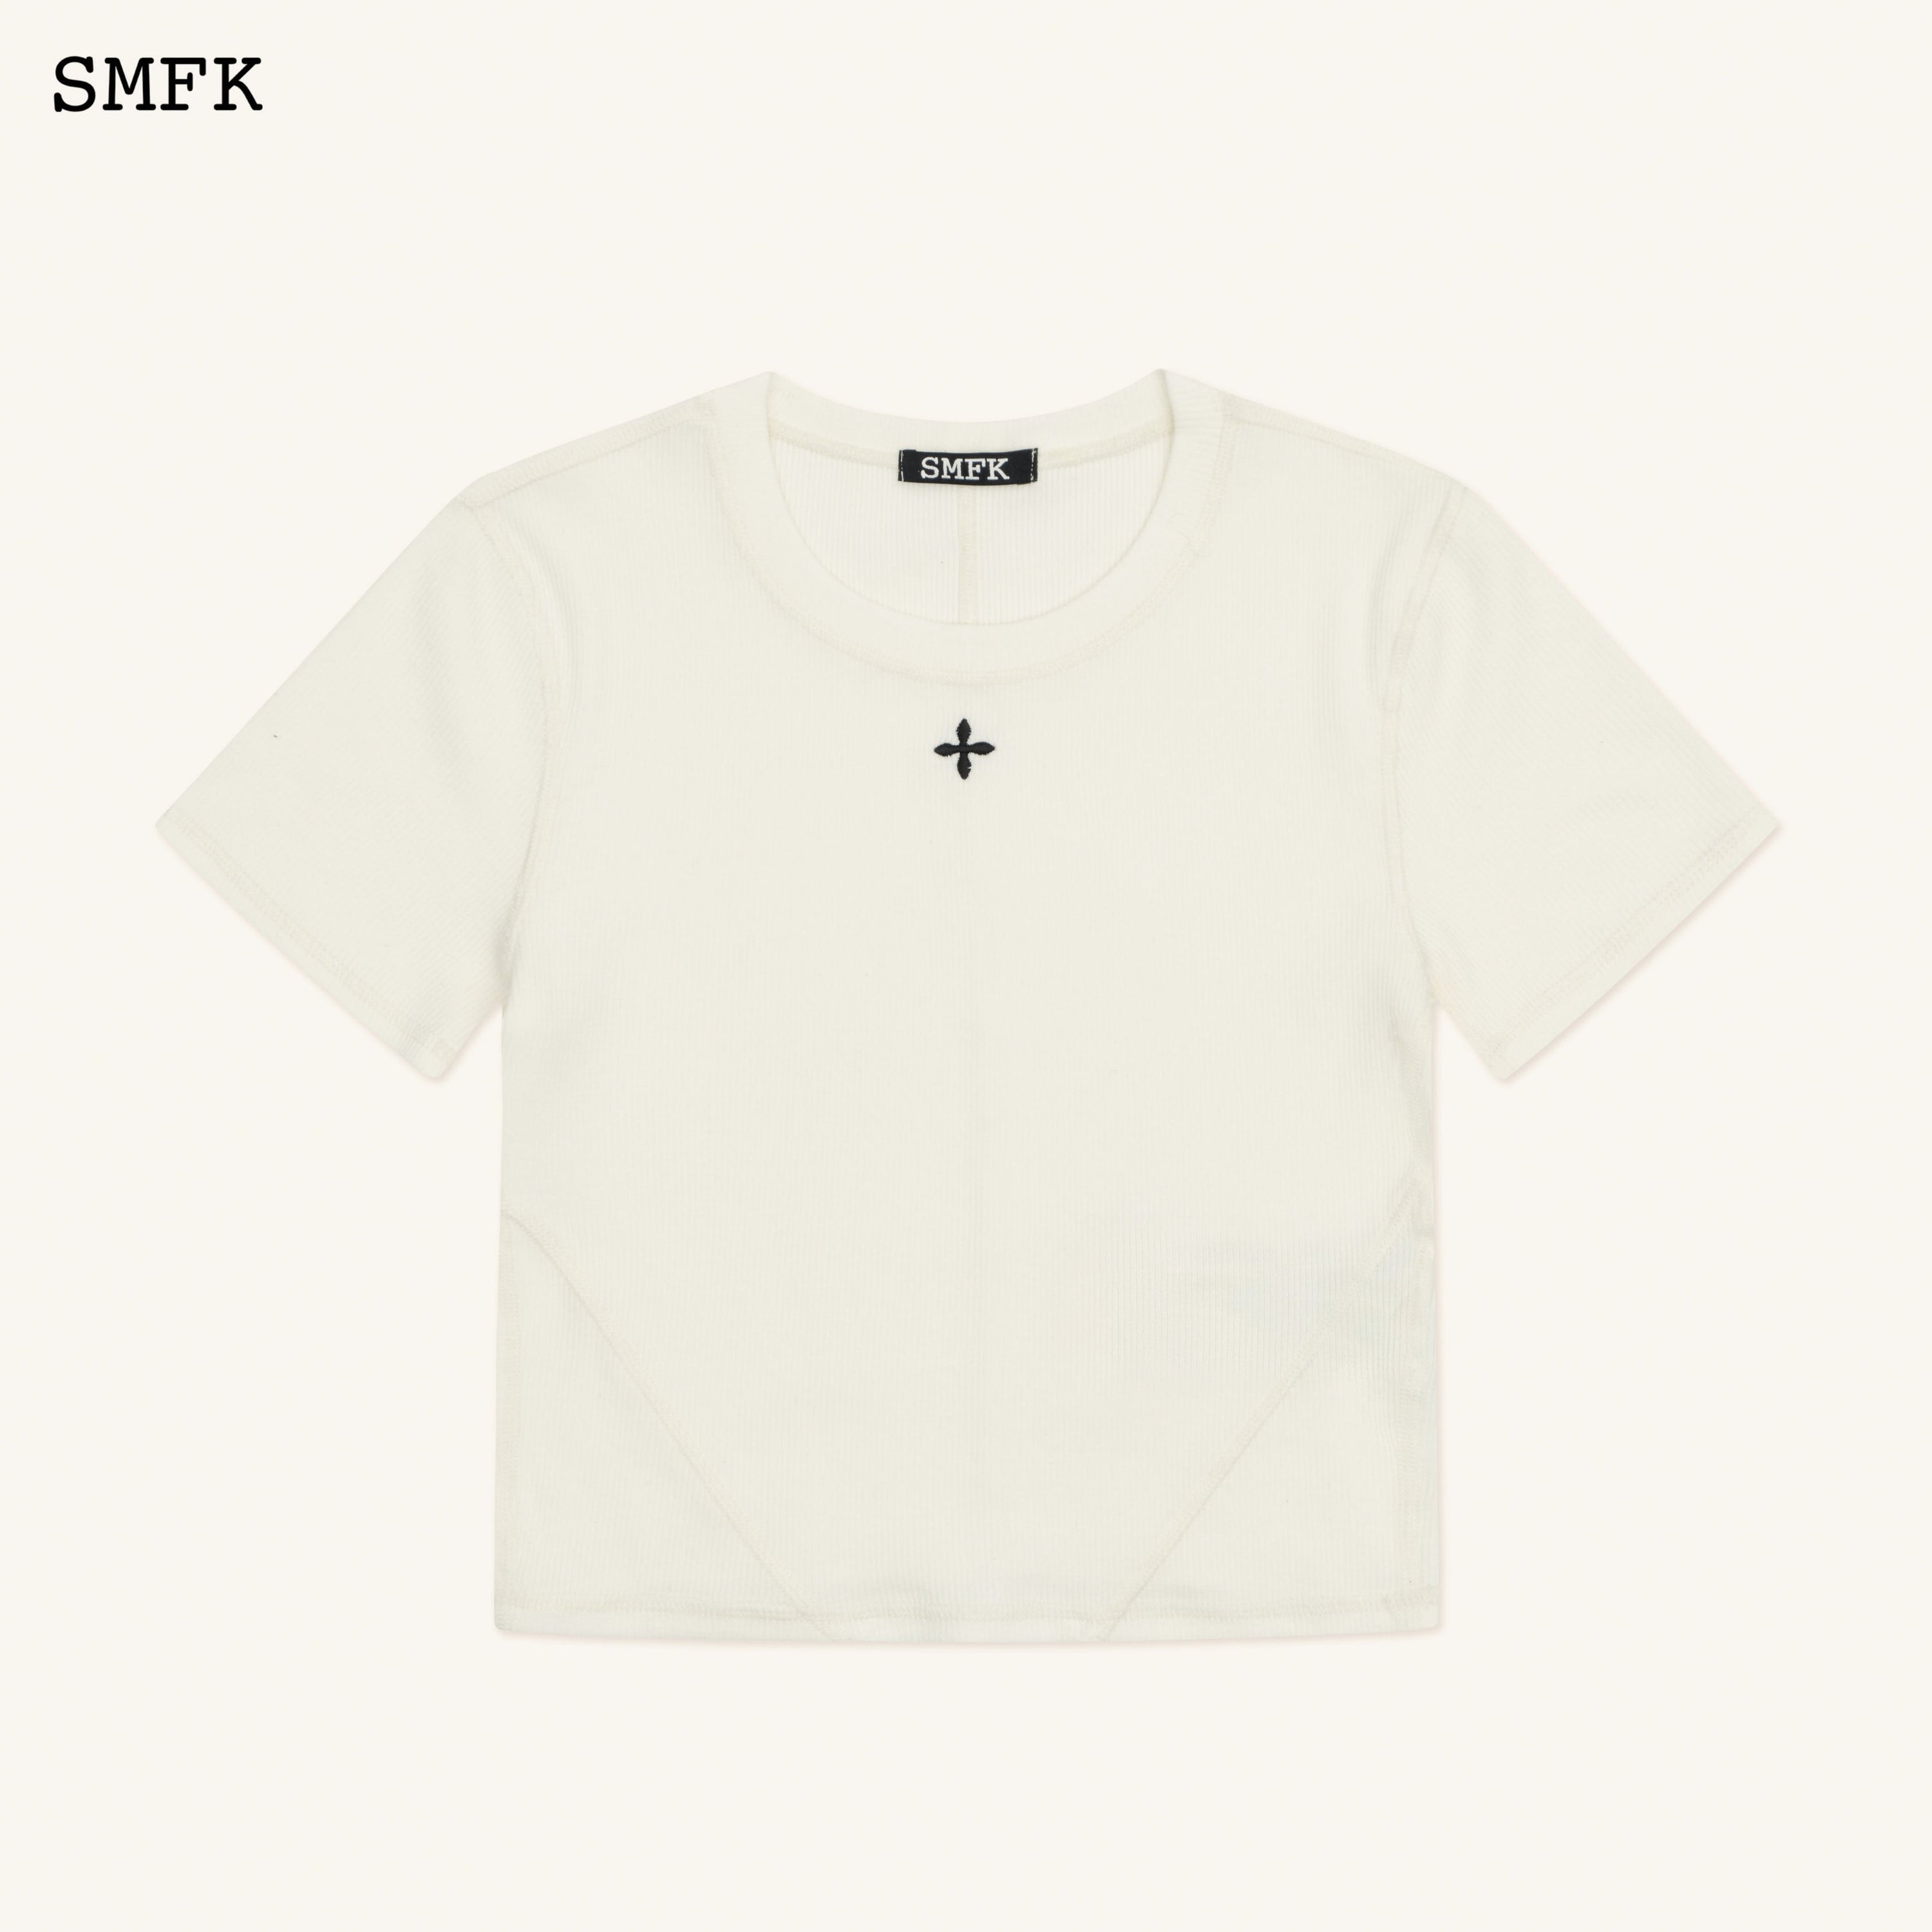 Compass Rush Slim-Fit Tee In White - SMFK Official